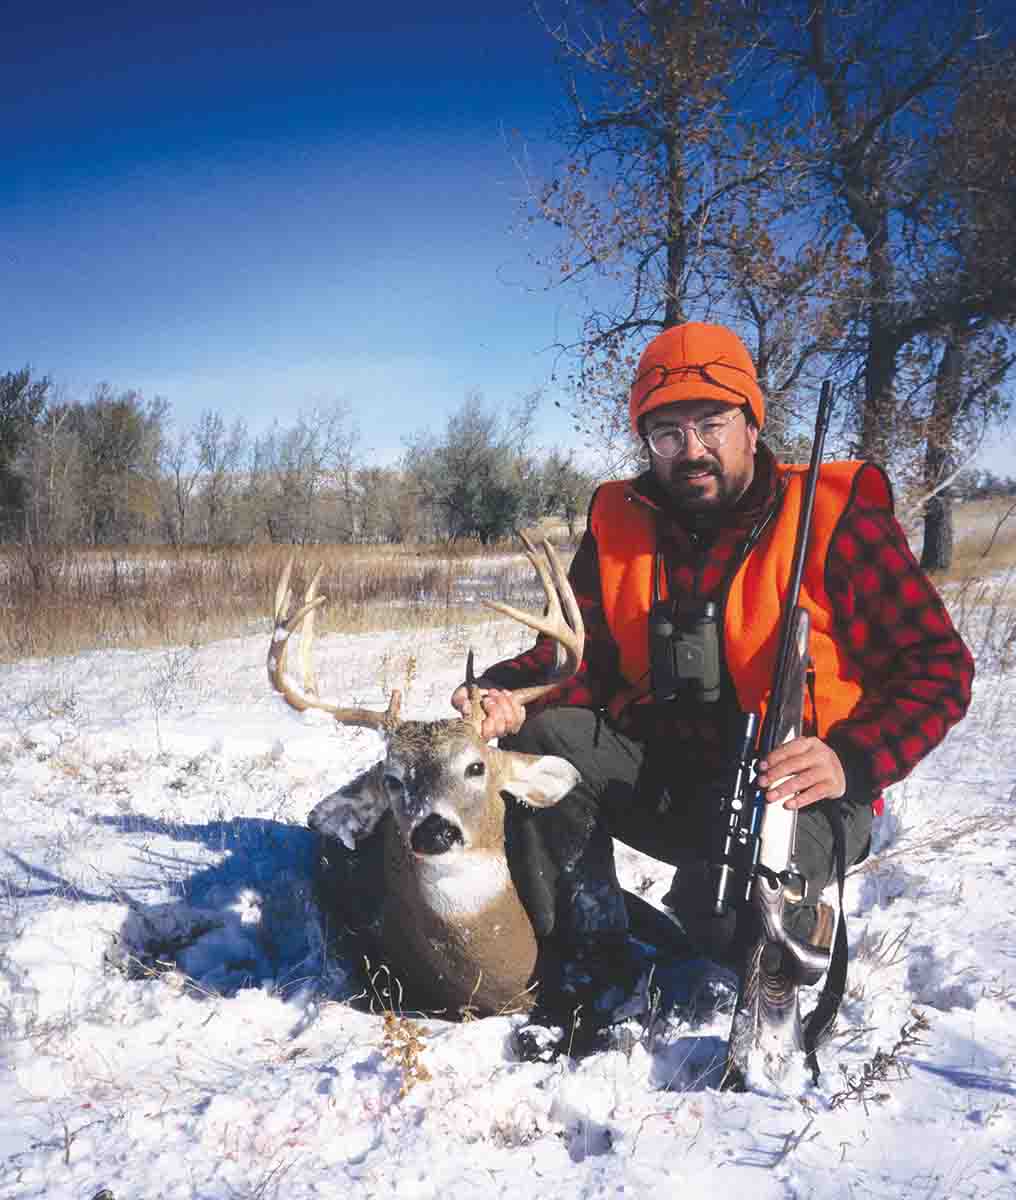 The 7mm Remington Magnum works very well as an all-around cartridge for both deer and larger game. John shot this whitetail buck in 1991 with a Browning A-Bolt.